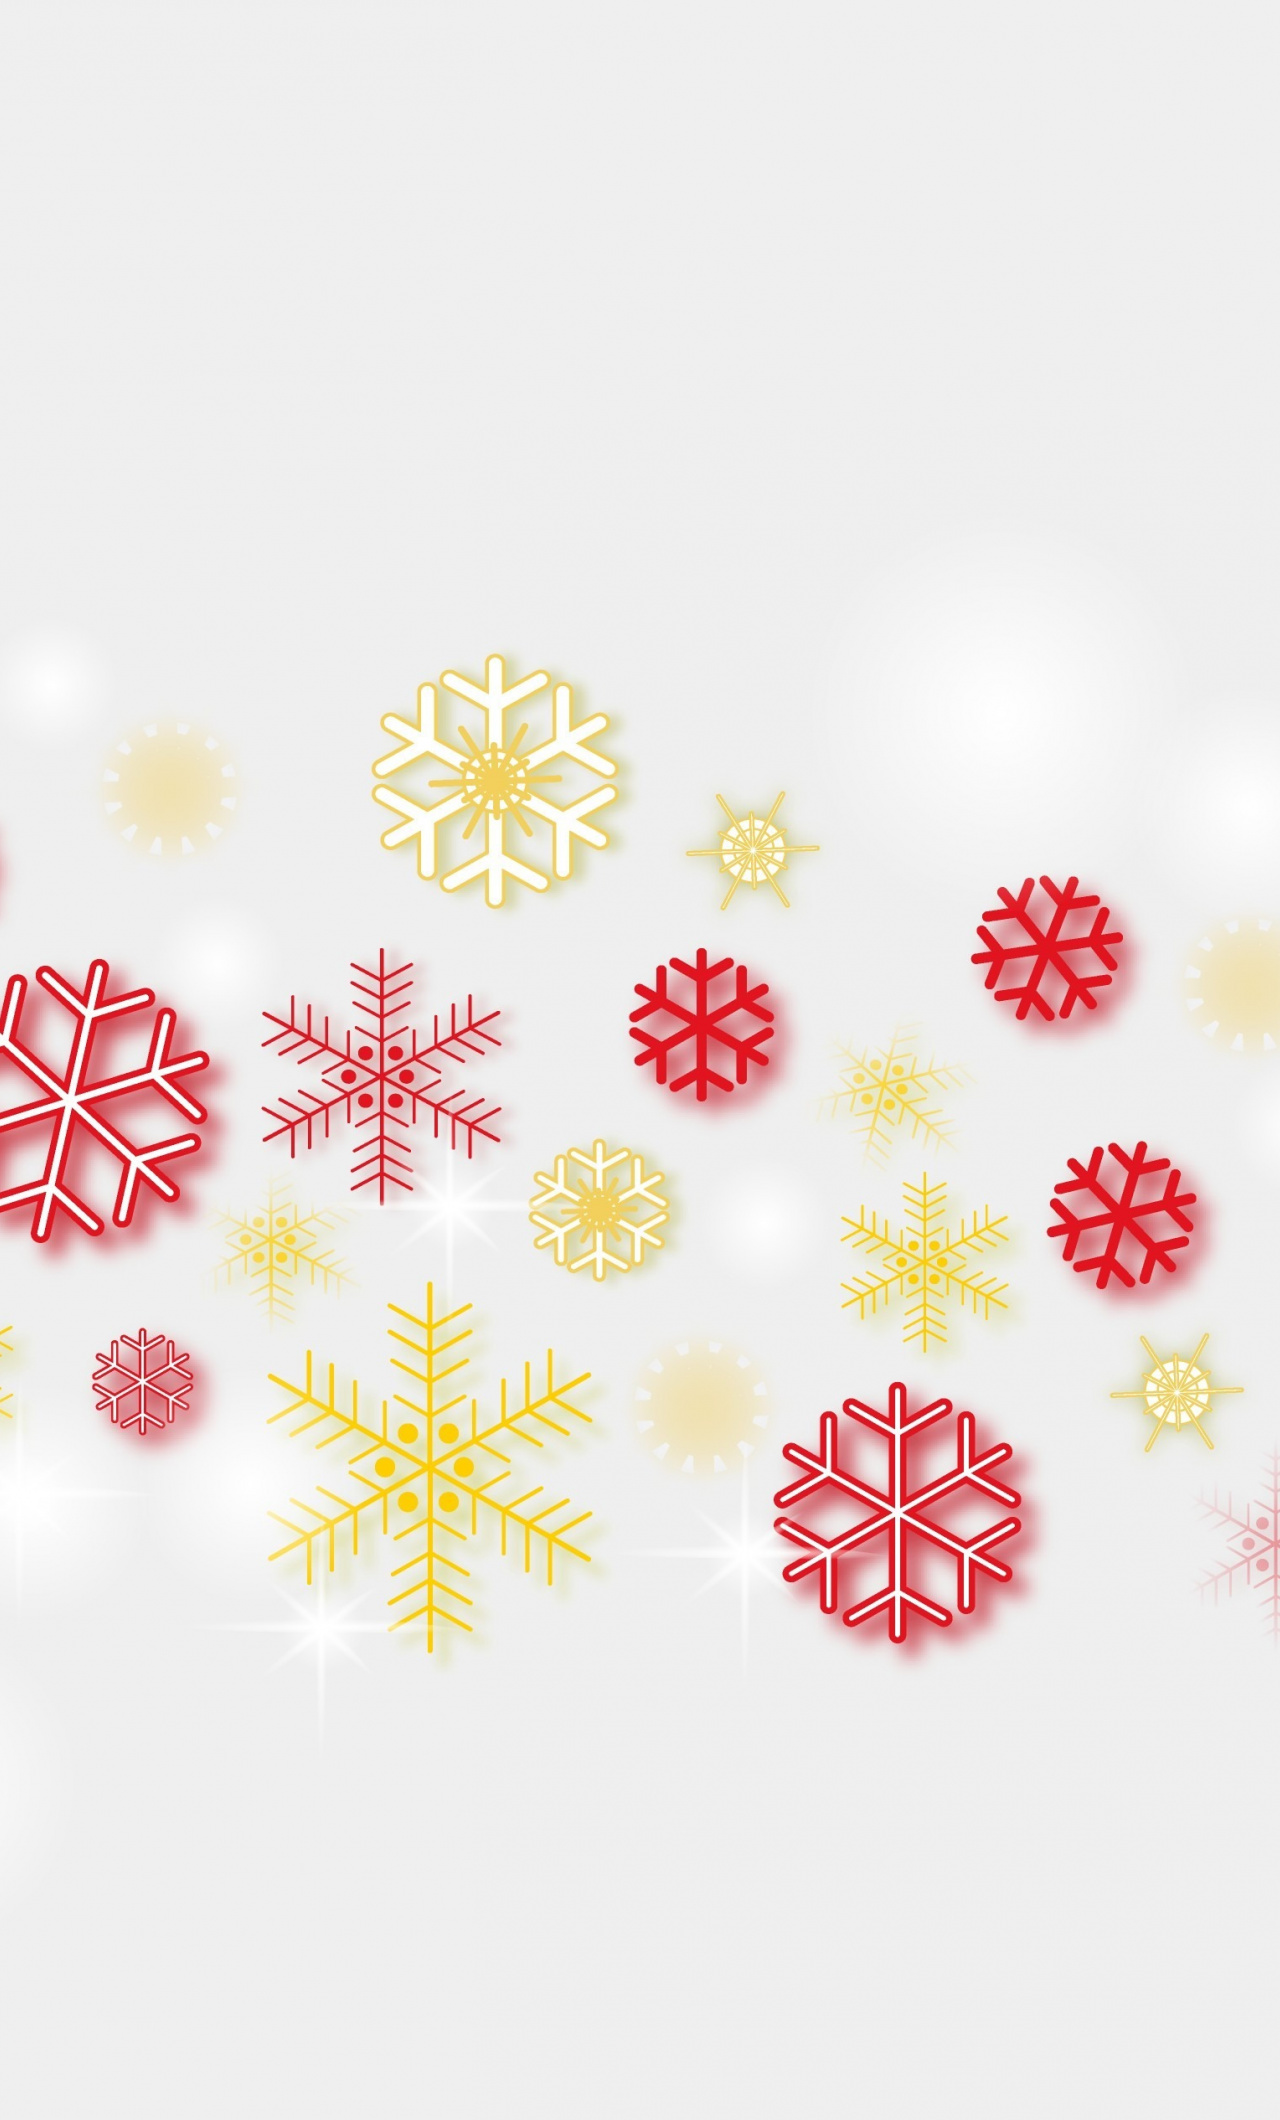 Abstract, Christmas, Snowflakes, Wallpaper - Snowflakes Gold Red White Background - HD Wallpaper 